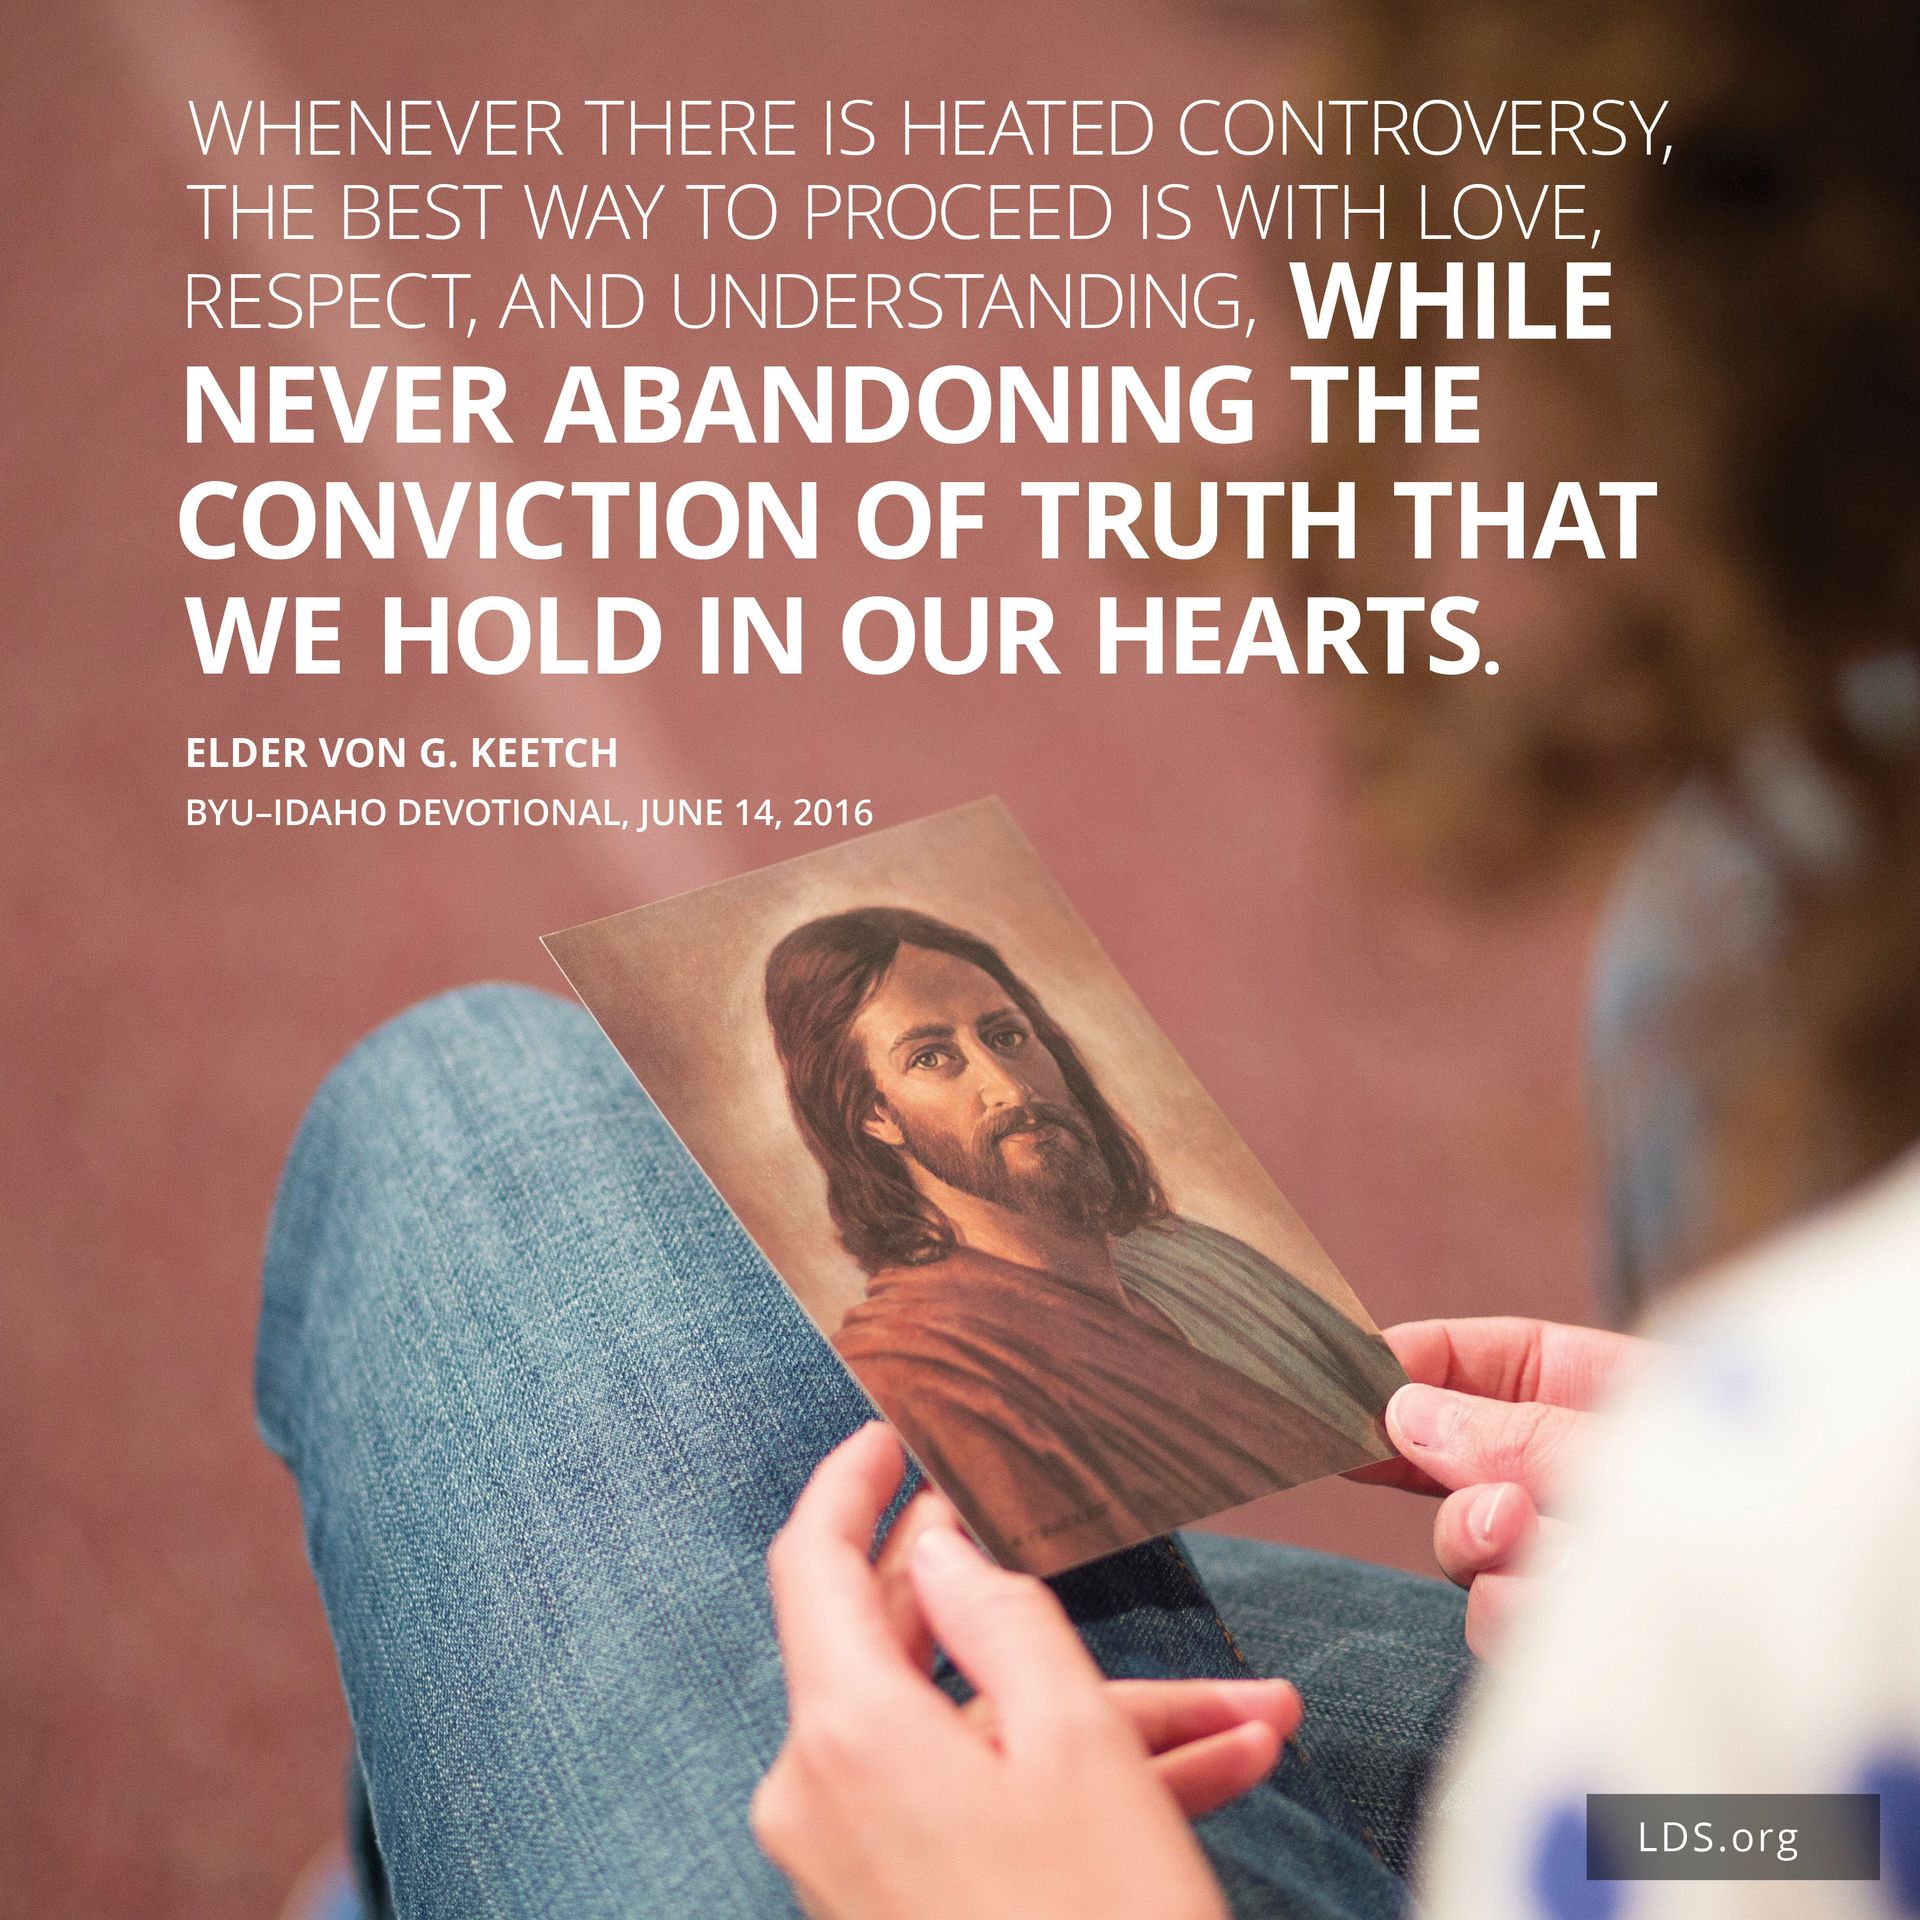 “Whenever there is heated controversy, the best way to proceed is with love, respect, and understanding, while never abandoning the conviction of truth that we hold in our hearts.”—Elder Von G. Keetch, BYU–Idaho devotional, June 14, 2016